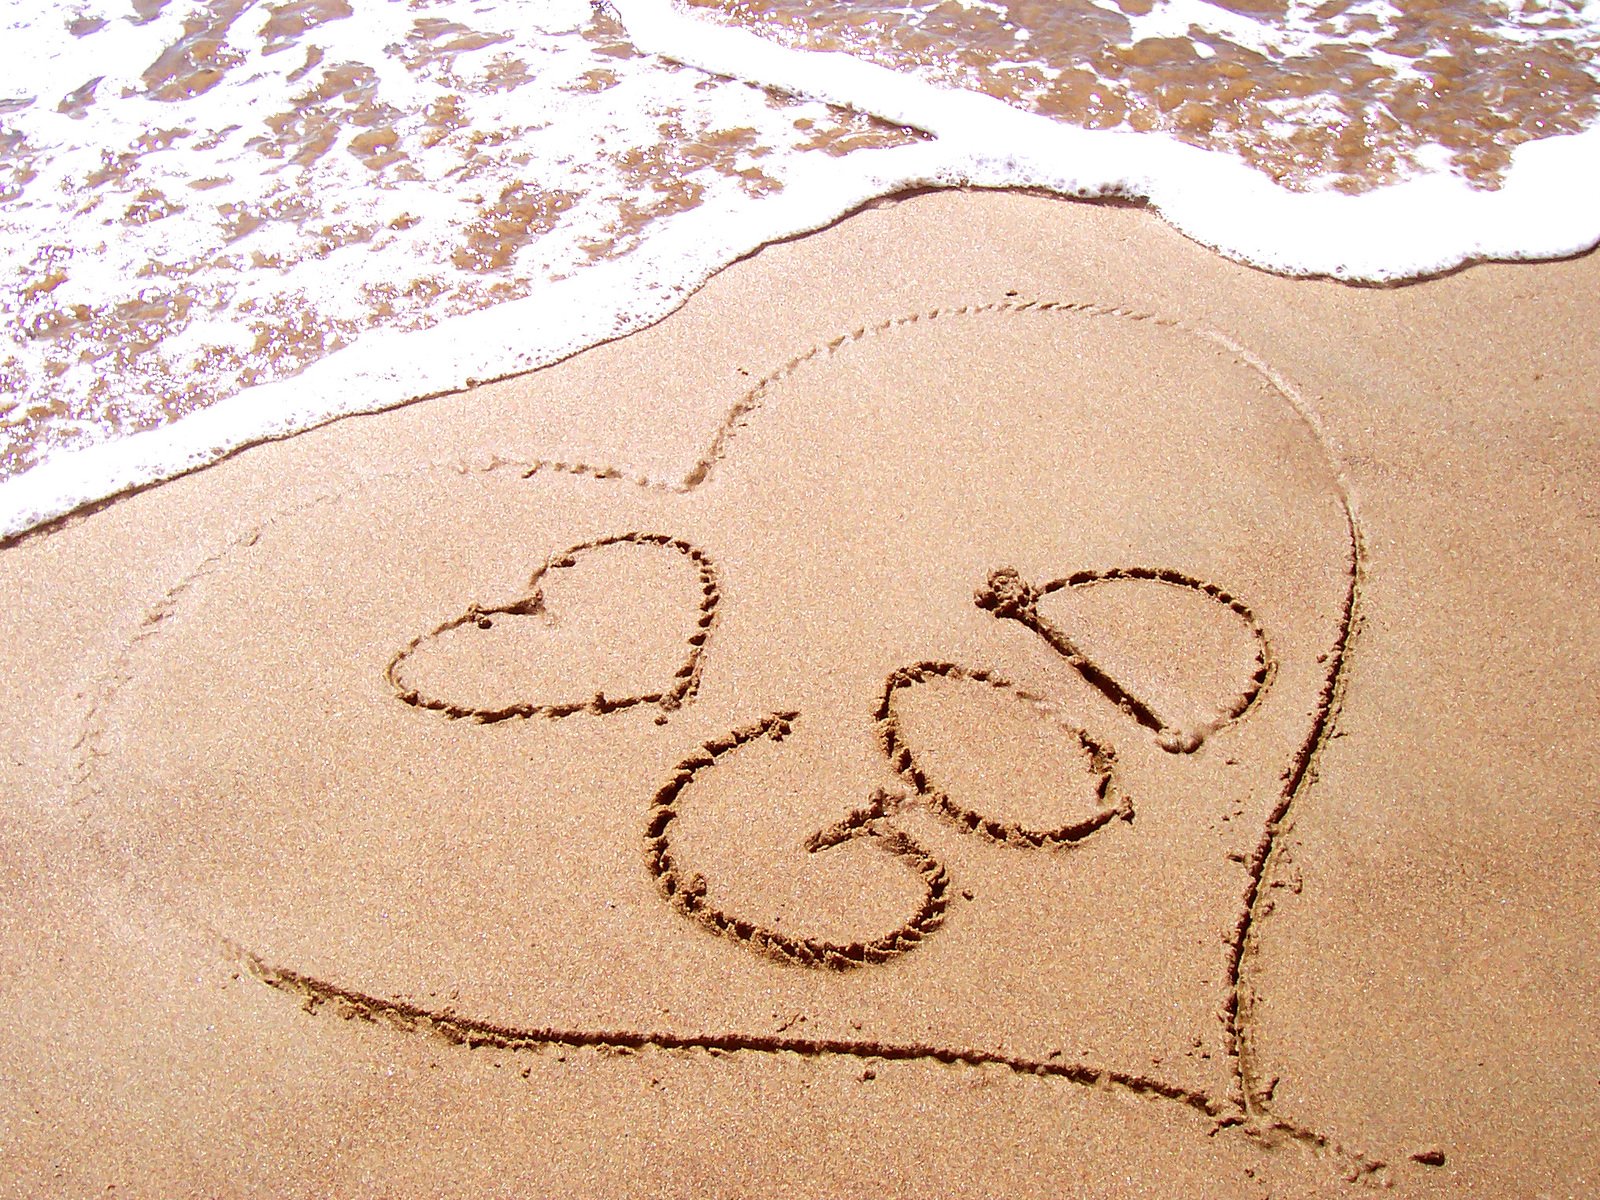 an image of a message and someone on the beach